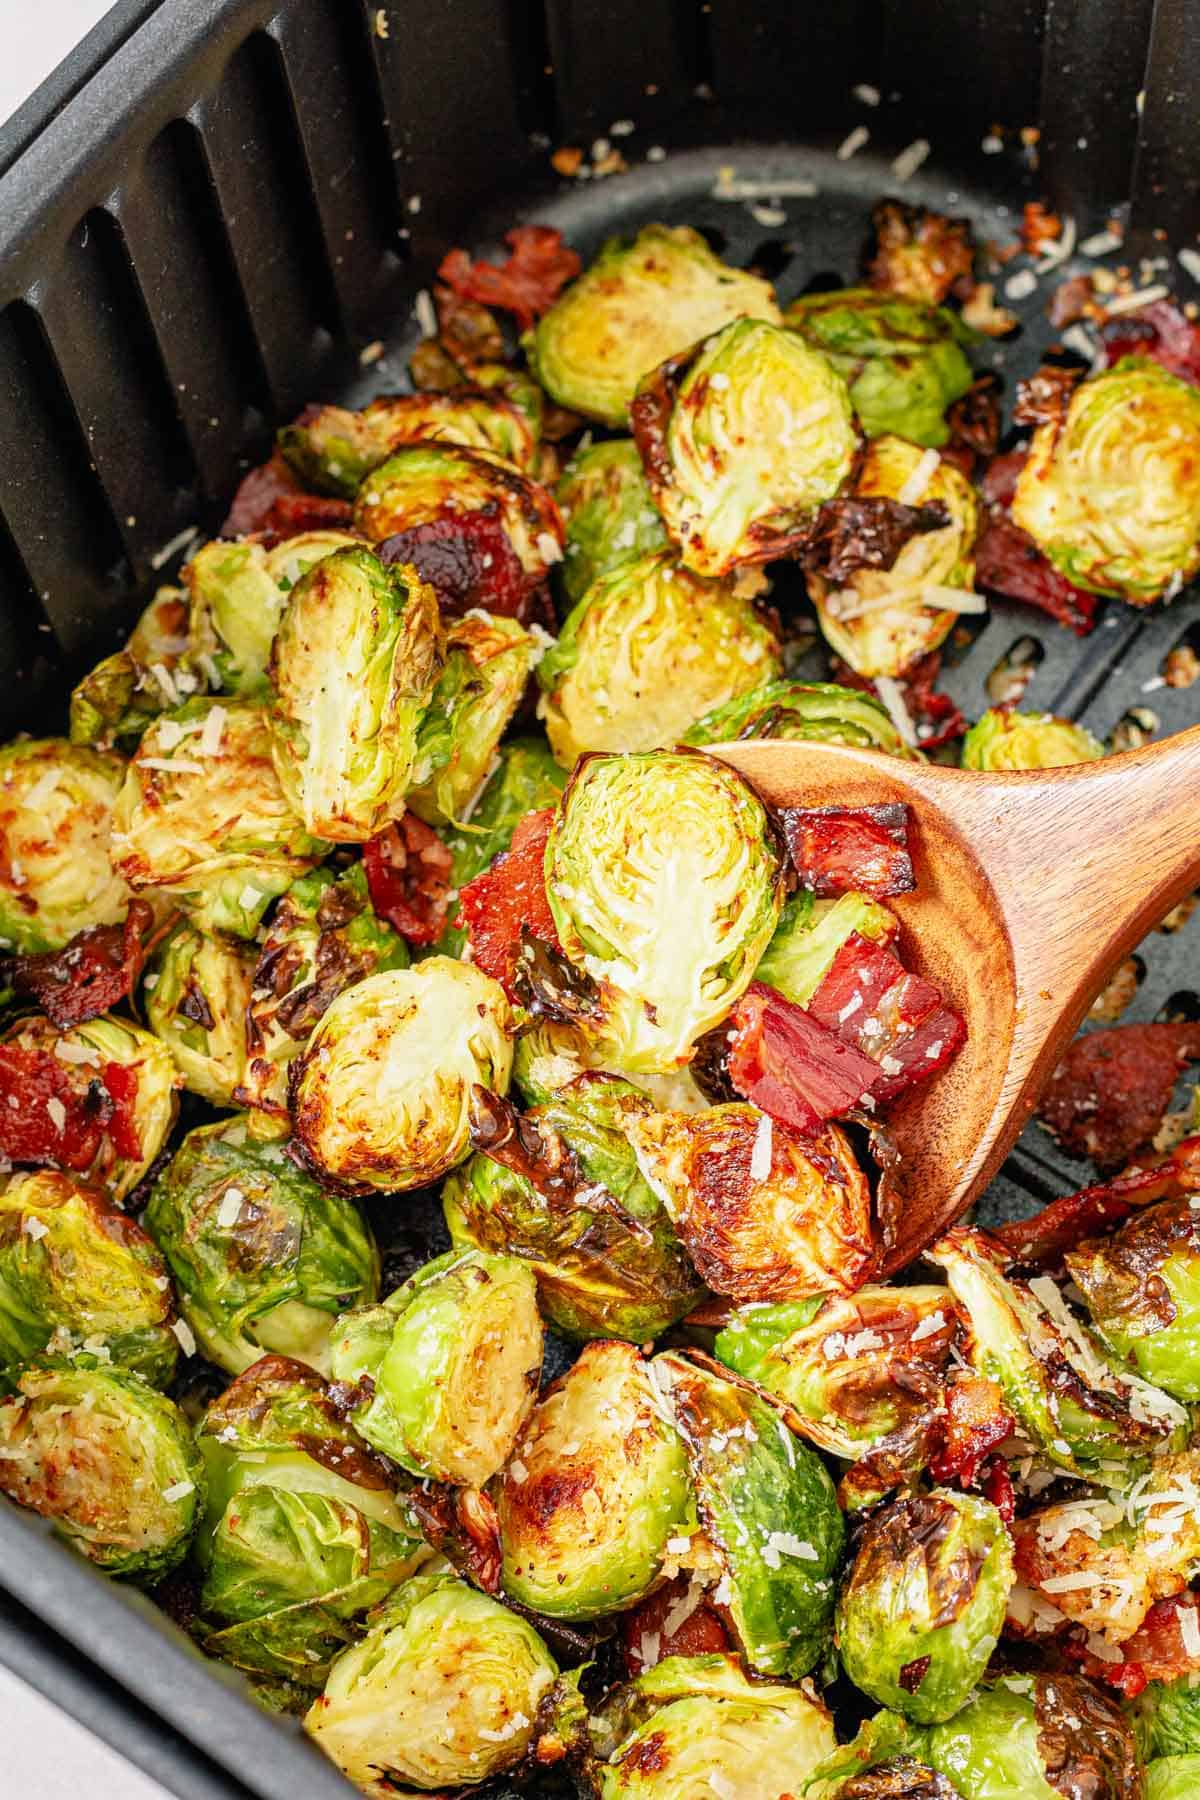 wooden spoon in cooked brussel sprouts basket